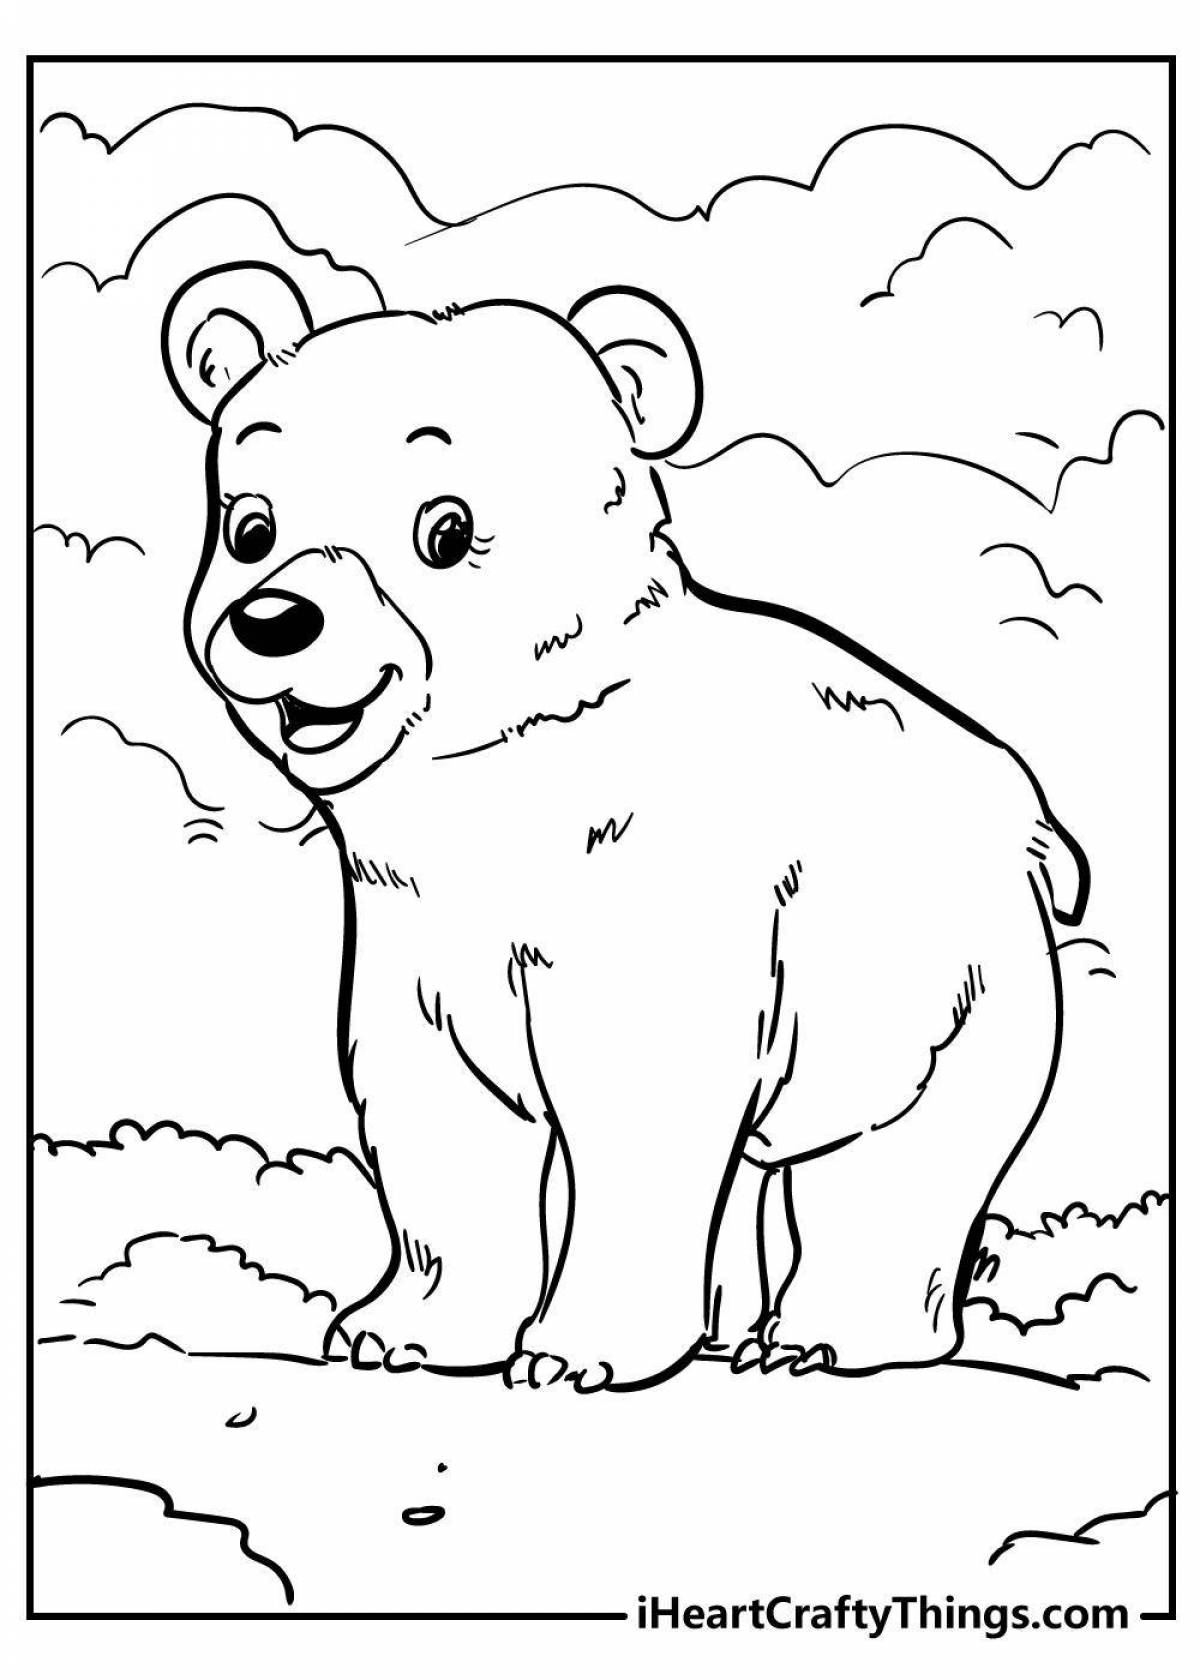 Playful bear in the den coloring book for children